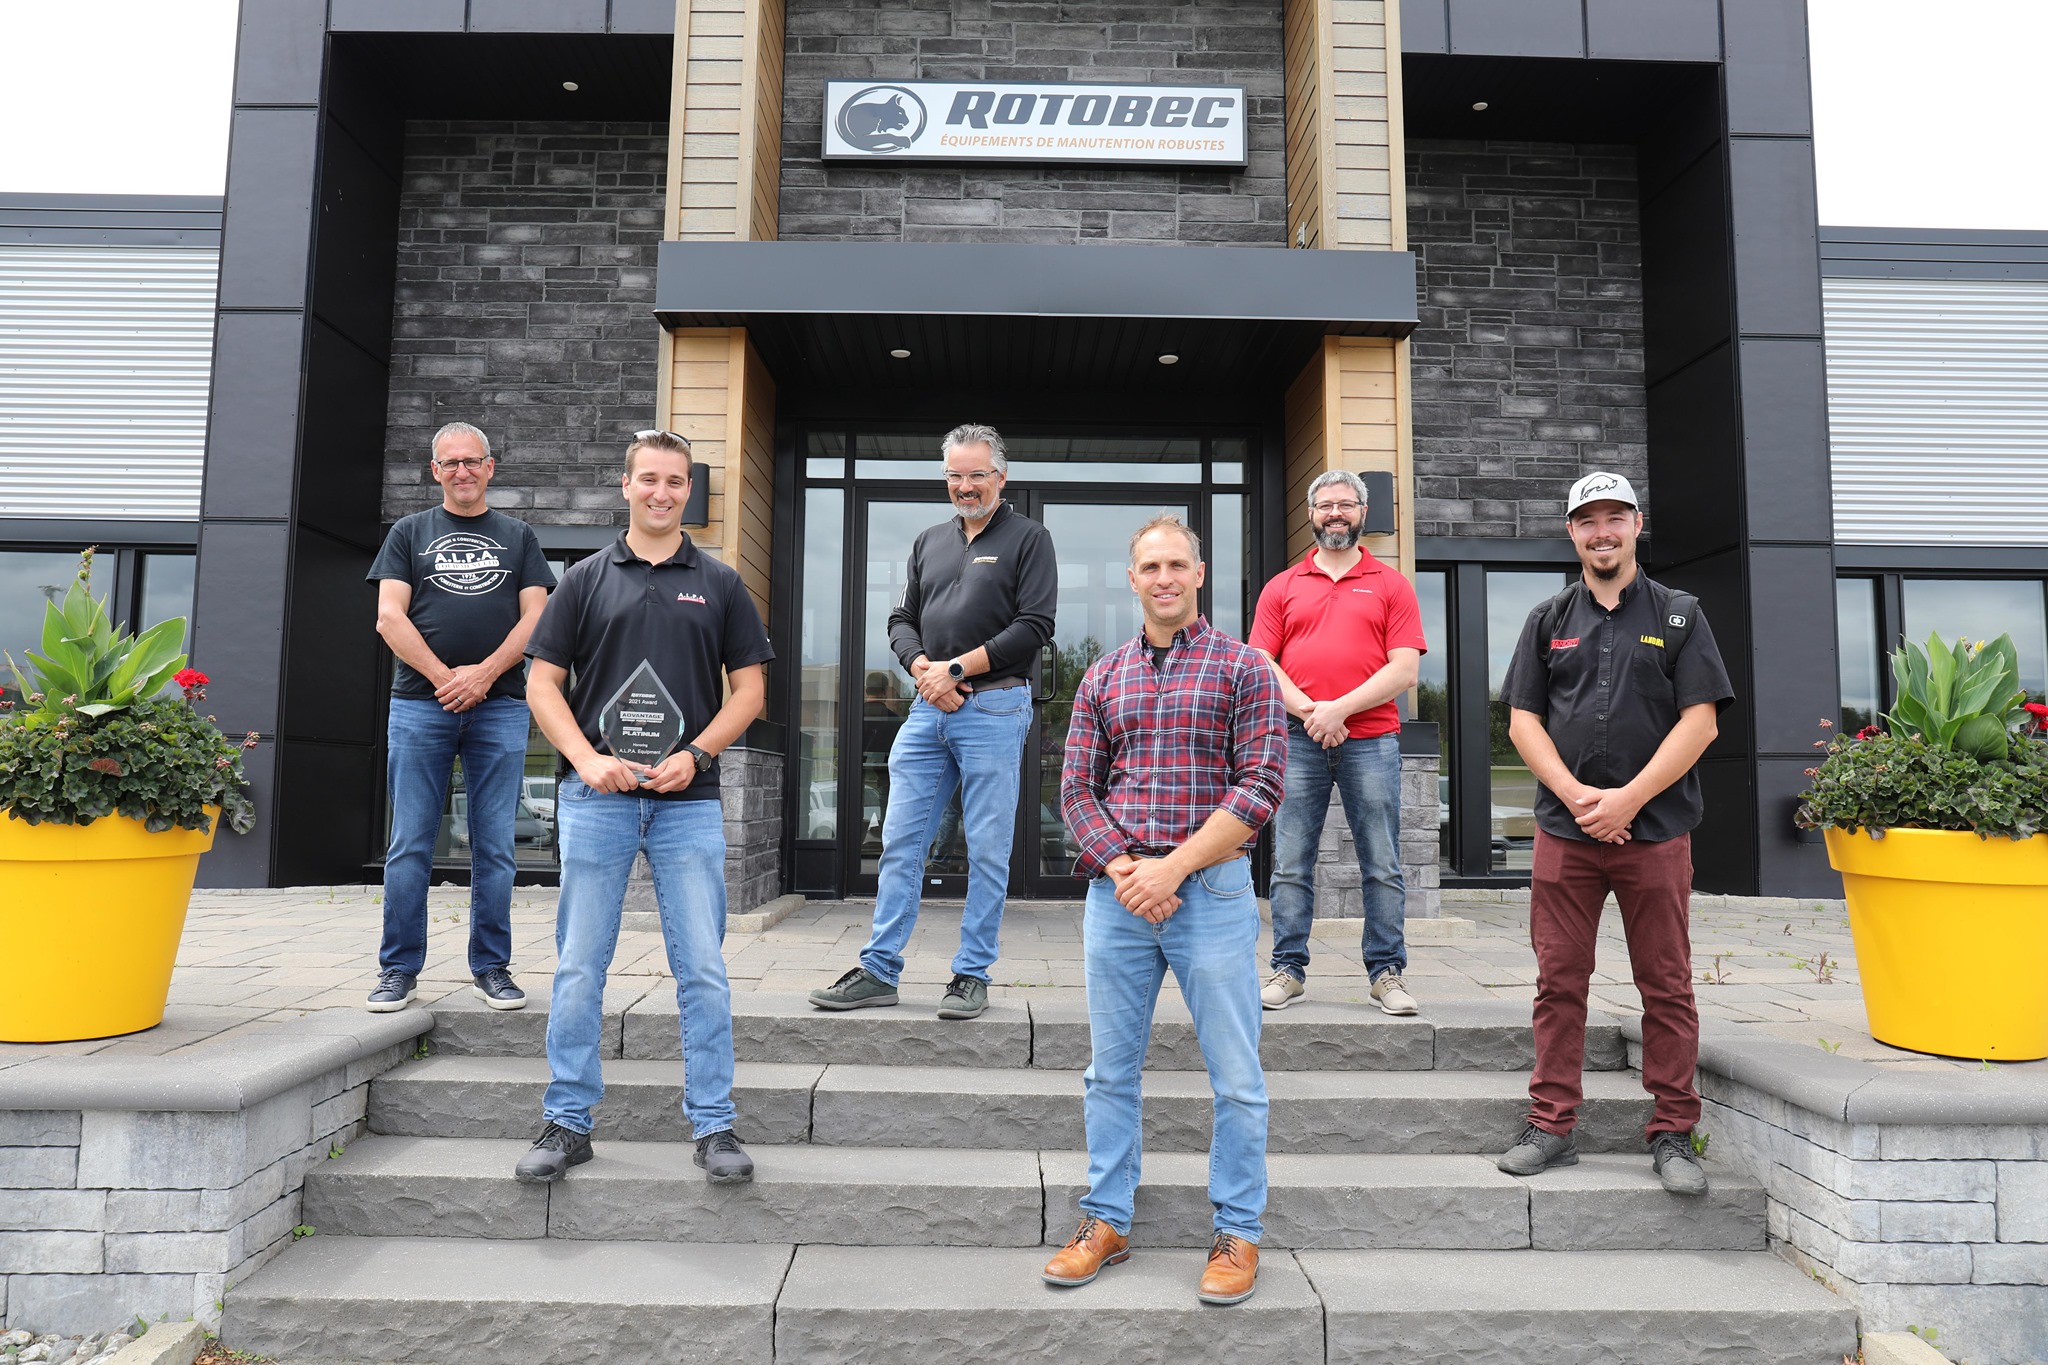 The Rotobec team in front of their office.